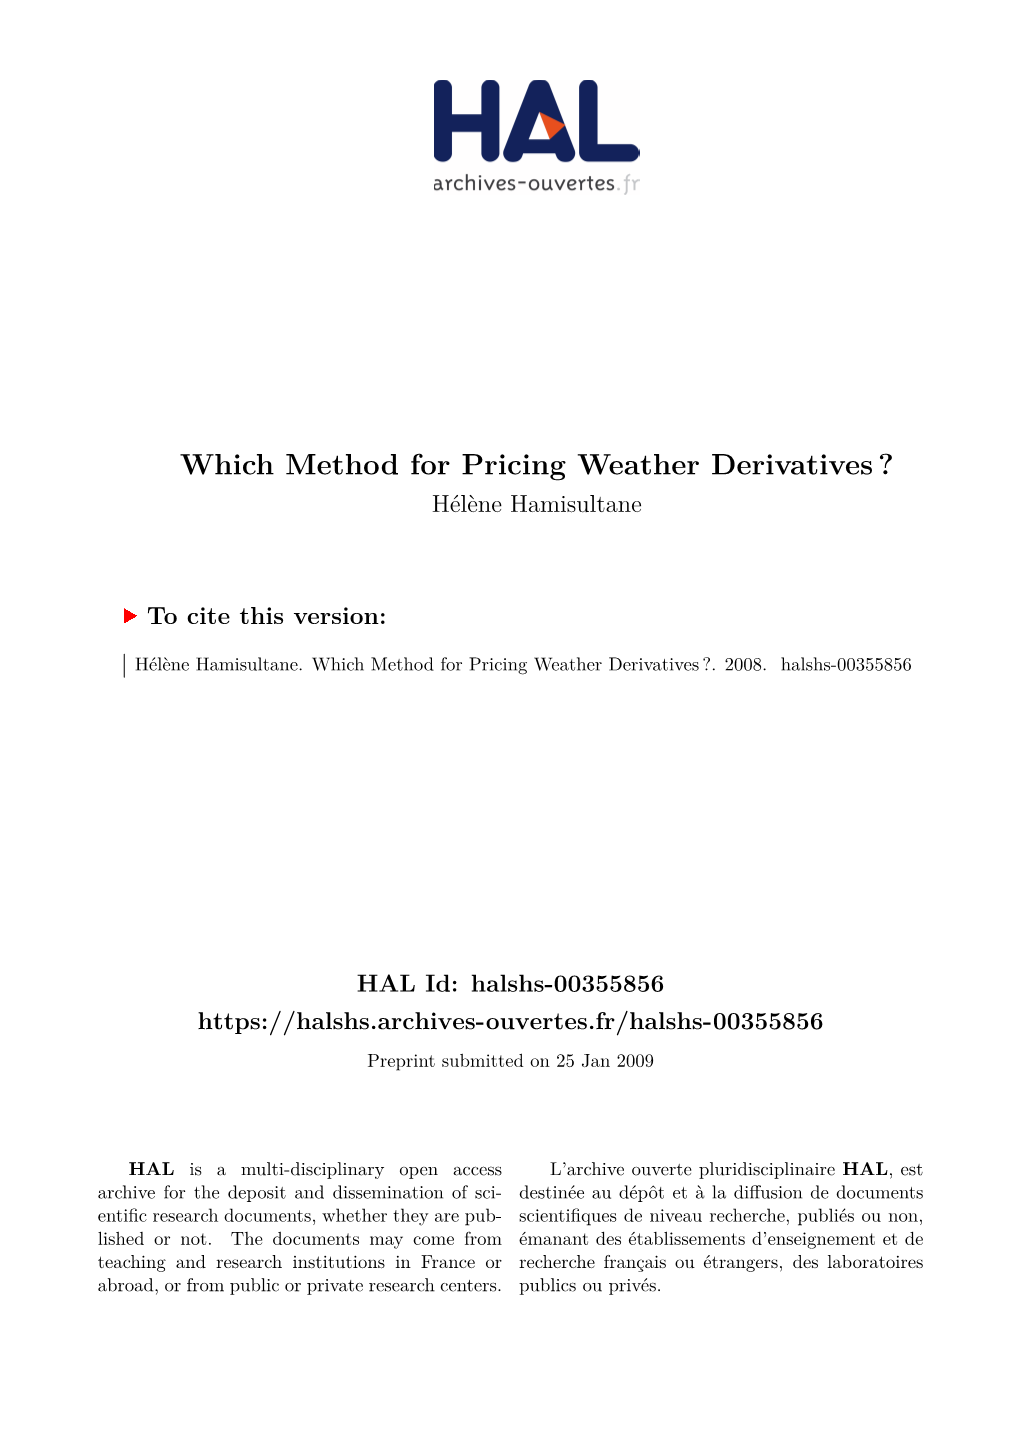 Which Method for Pricing Weather Derivatives?